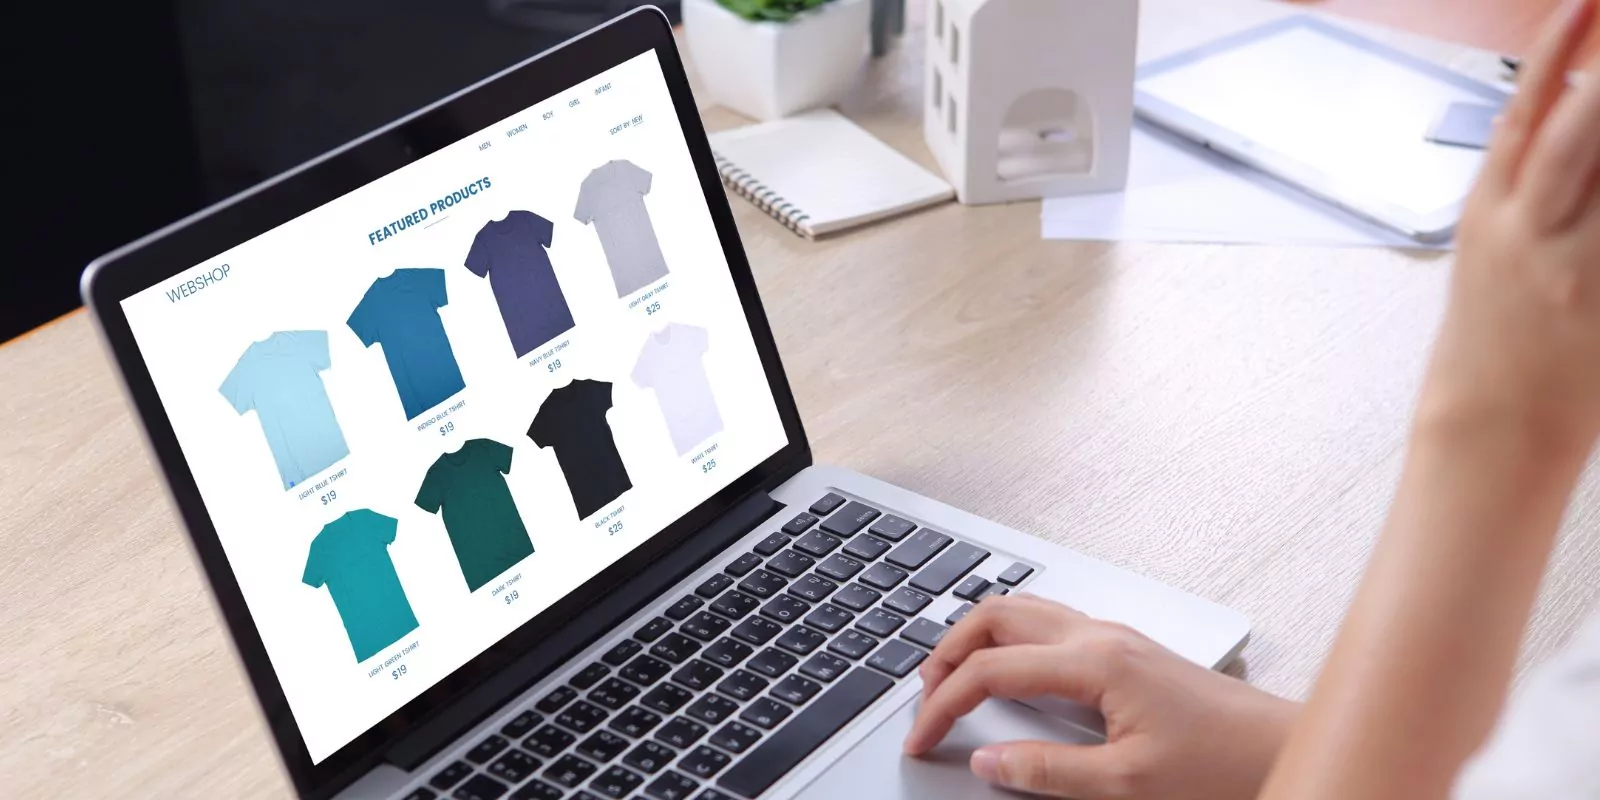 Web Design for E-commerce: 10 Designing Tips for a User-Friendly Online Shopping Experience